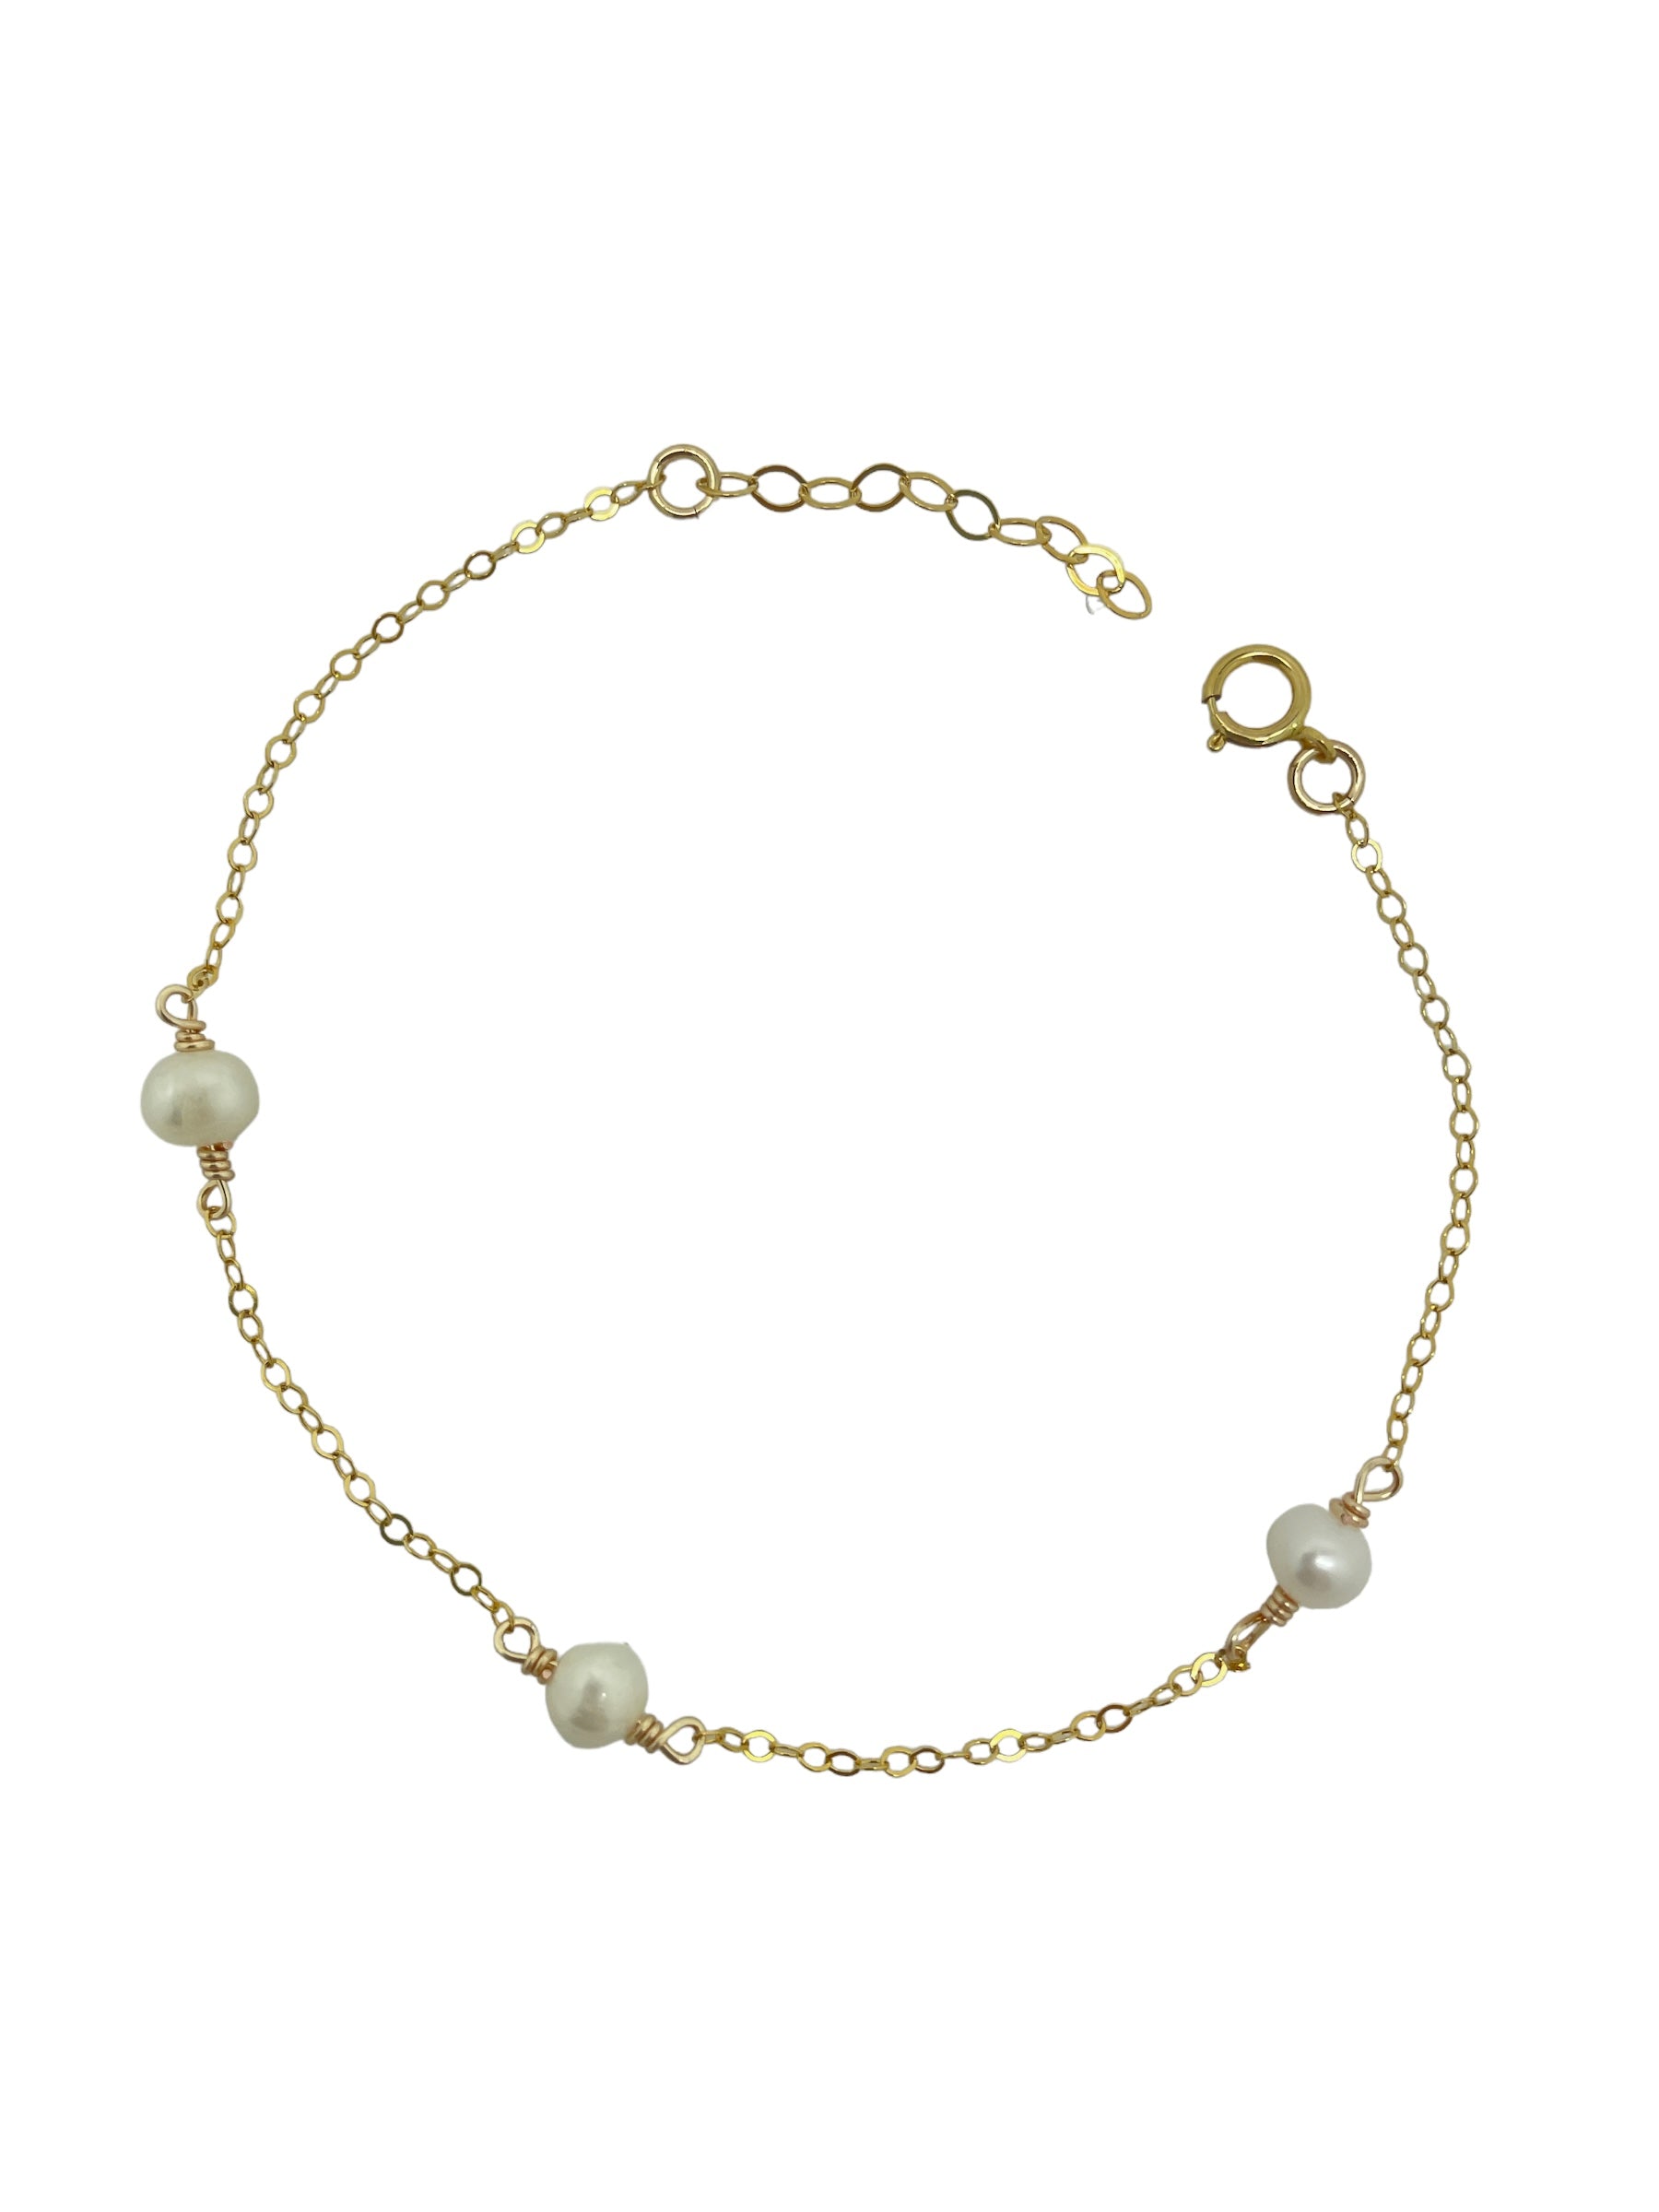 gold filled cable chain with 3 pearls wire wrapped to delicate chain, pearls are about 5mm, spring ring closure, 1 inch adjustable extender, on white background